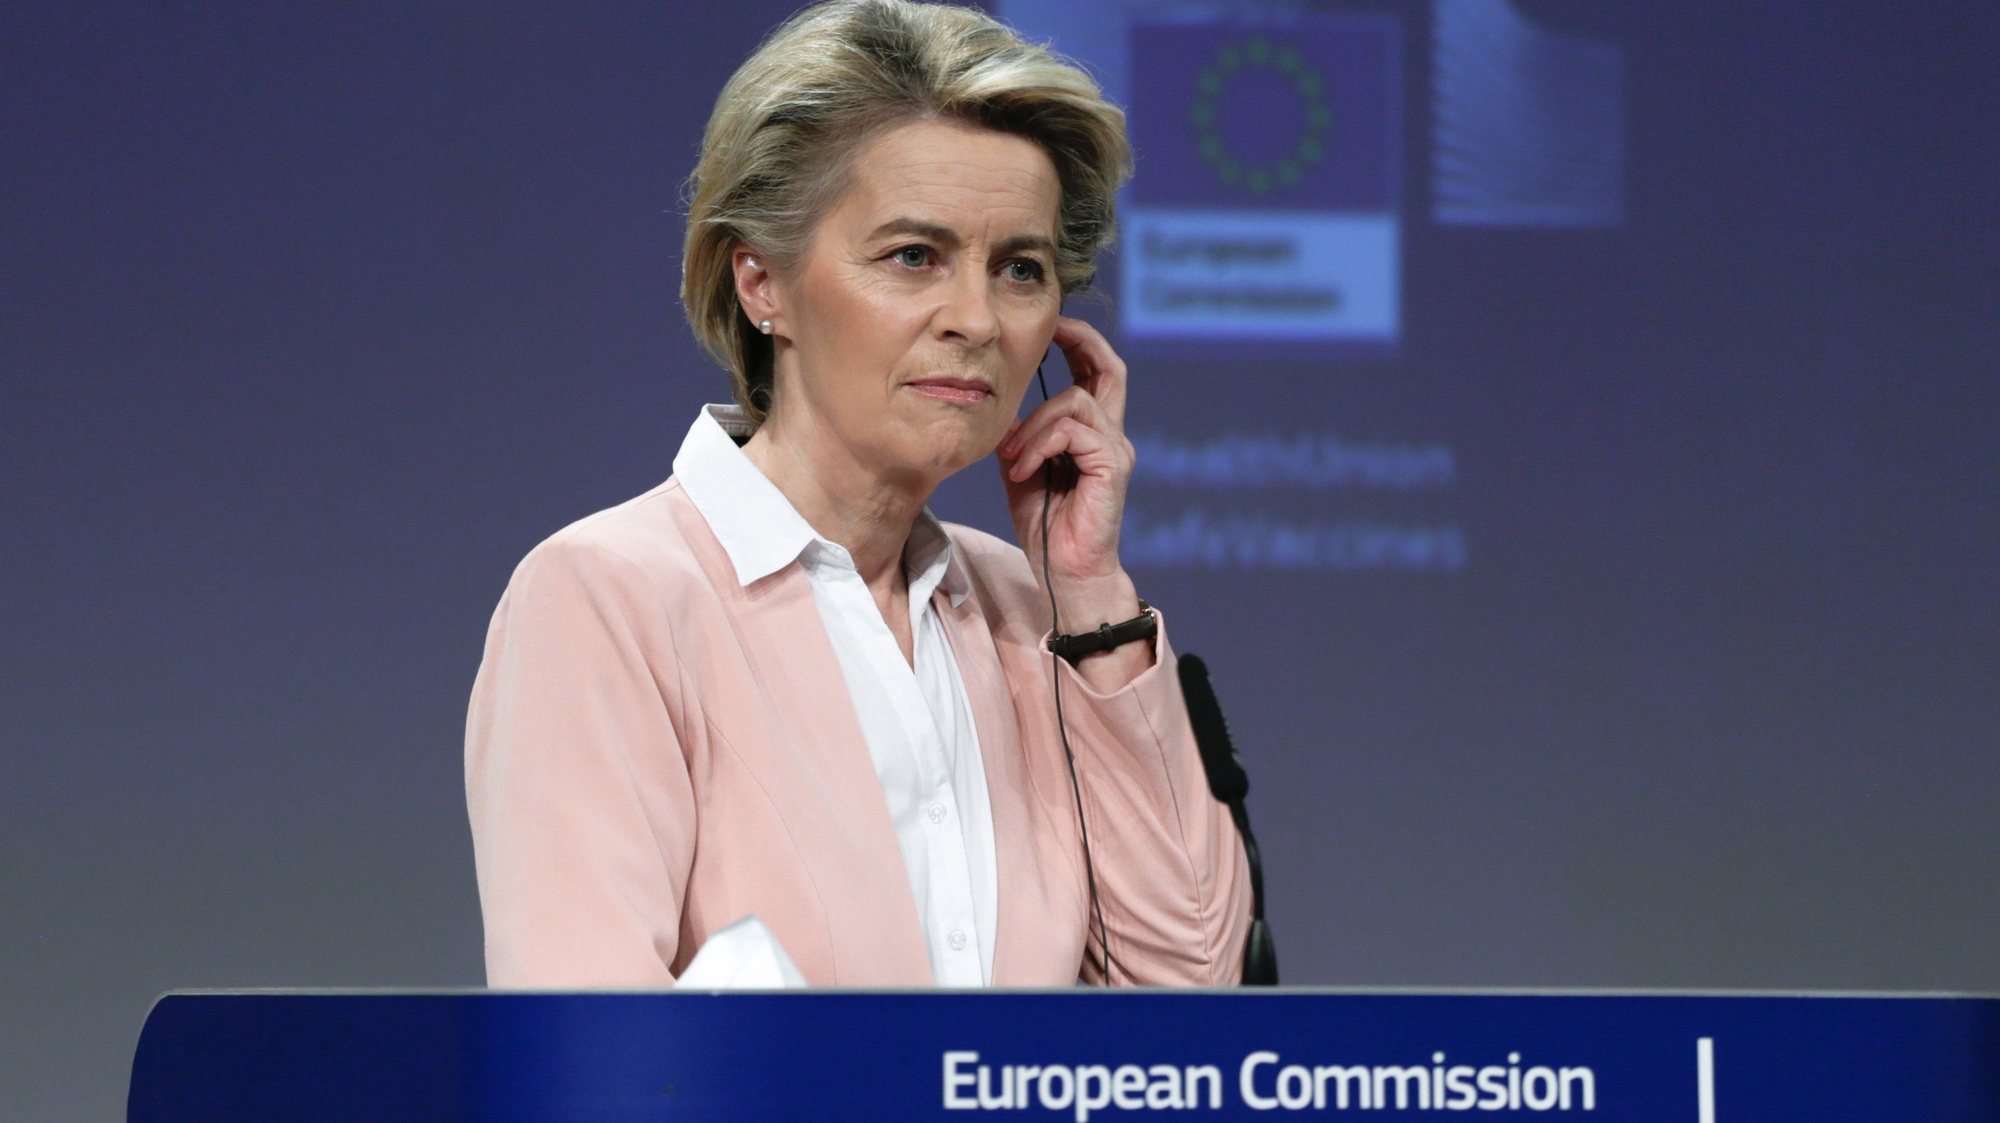 epa09018475 European Commission President Ursula von der Leyen gives a press conference on the HERA Incubator to anticipate the threat of the coronavirus variants at the European Commission Headquarters in Brussels, Belgium, 17 February 2021.  EPA/ARIS OIKONOMOU / POOL